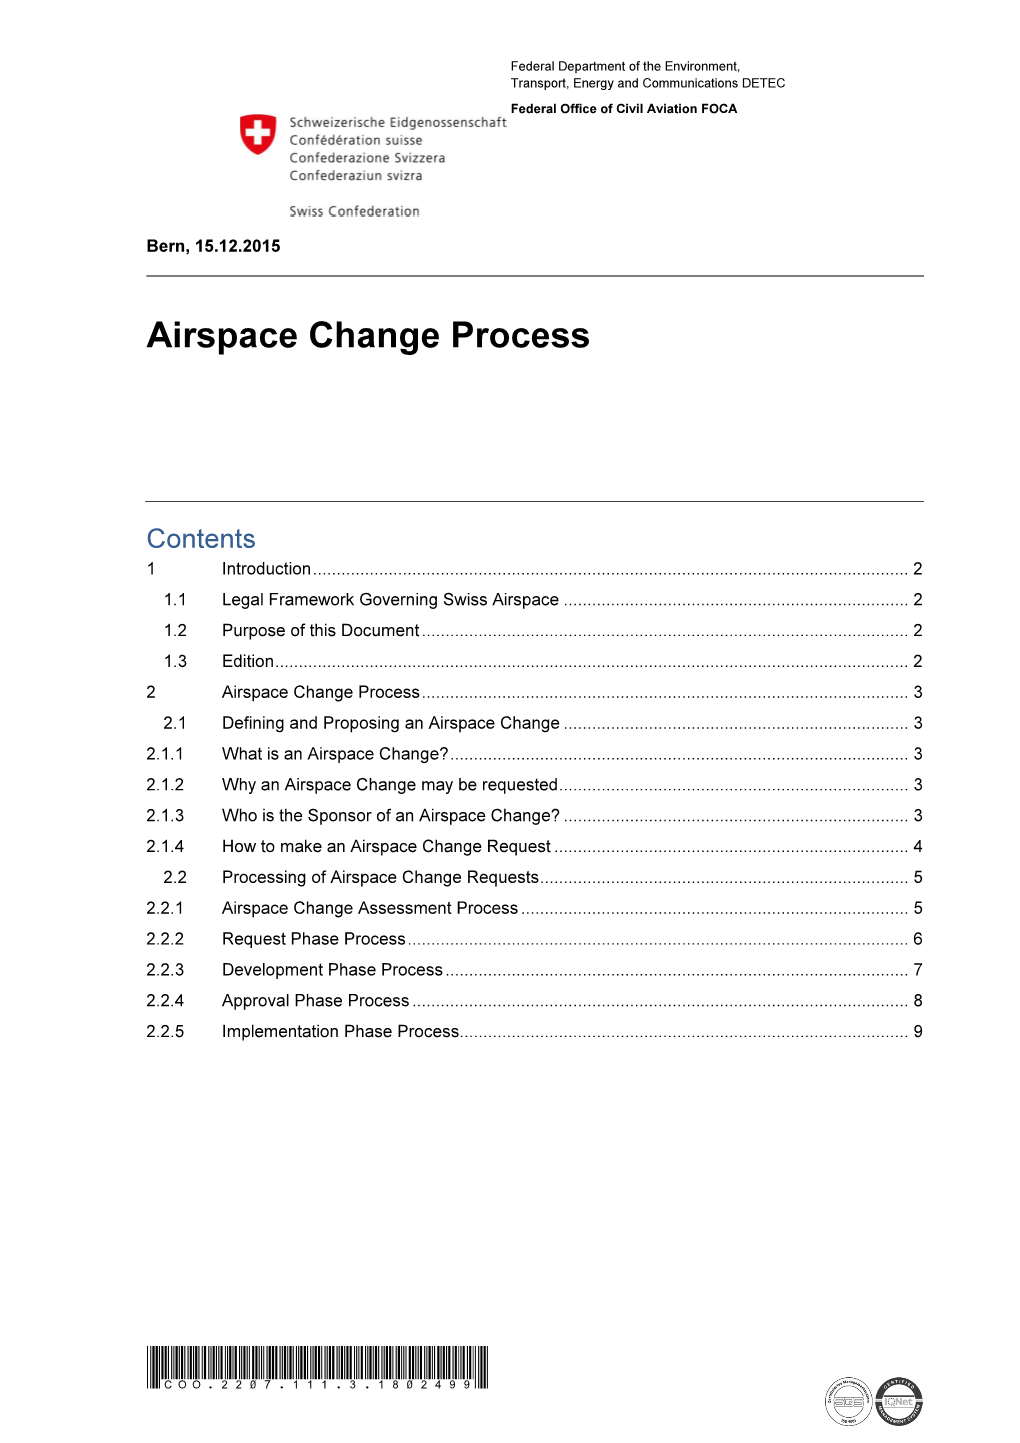 Airspace Change Process